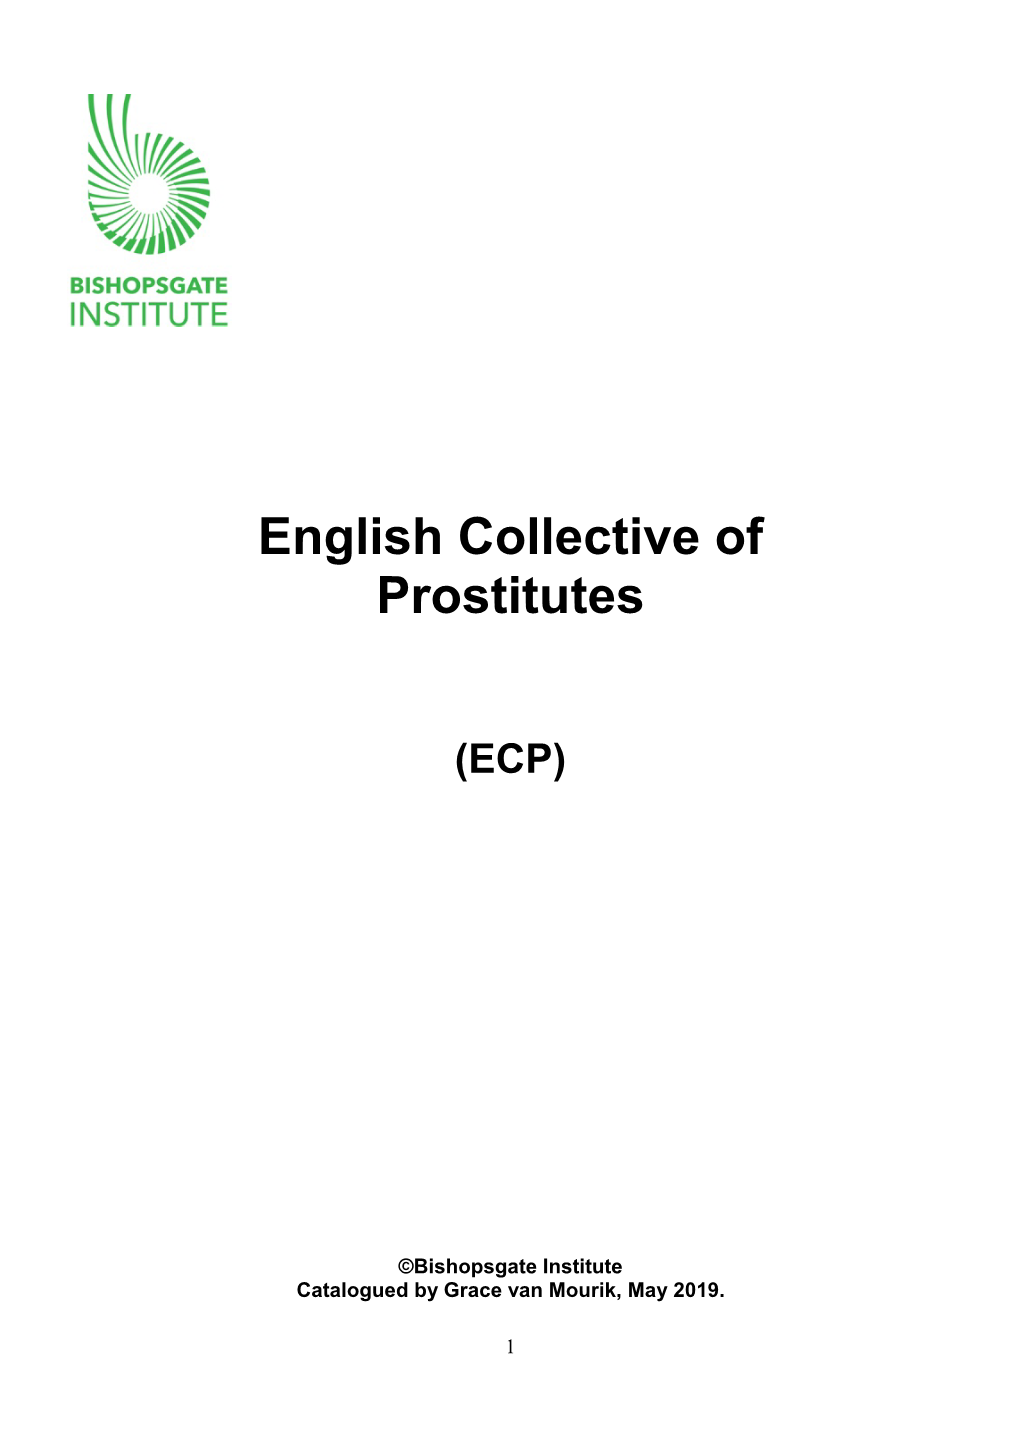 English Collective of Prostitutes